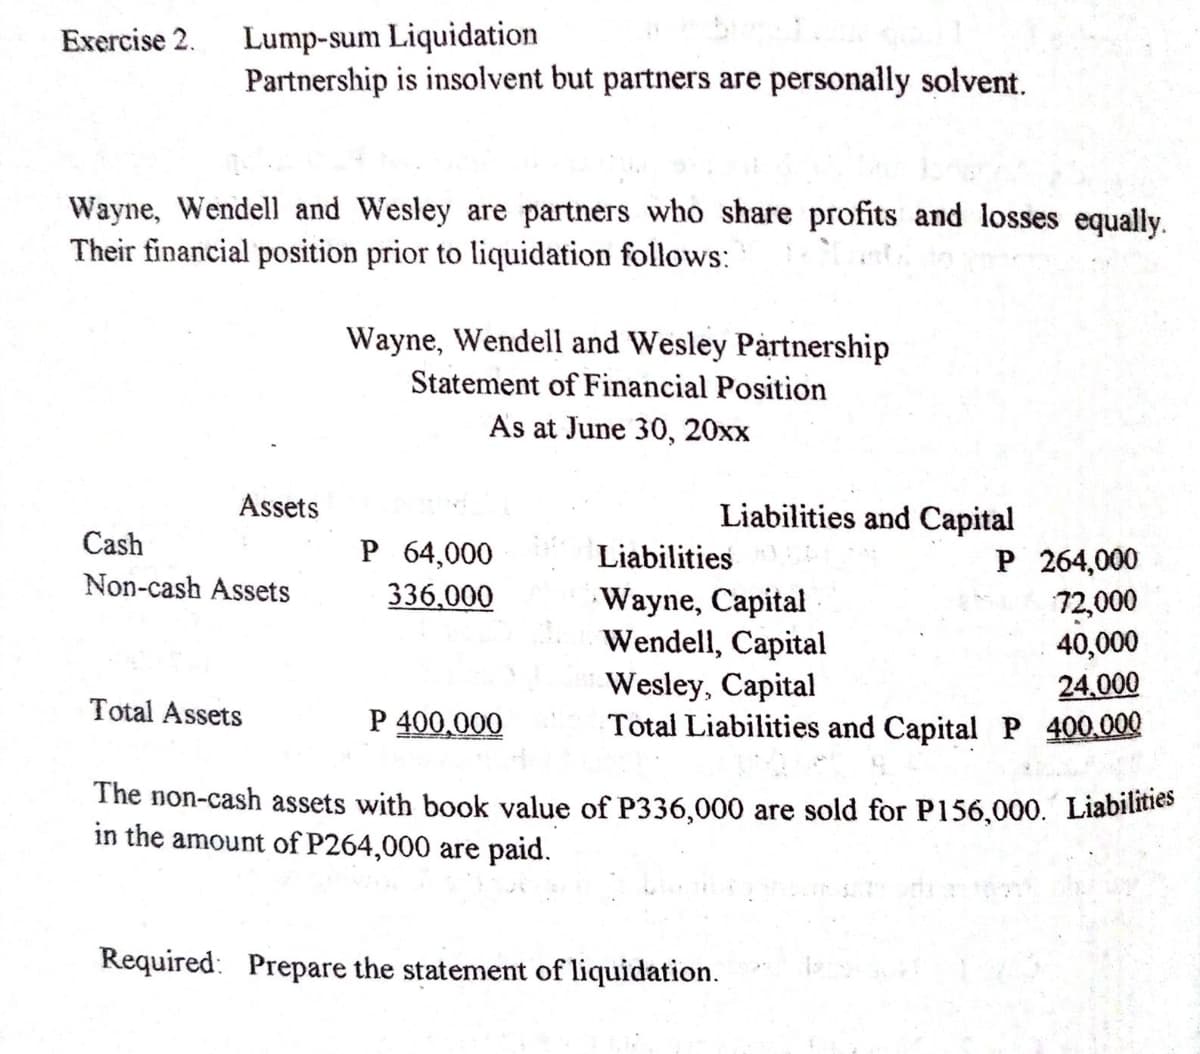 Lump-sum Liquidation
Partnership is insolvent but partners are personally solvent.
Exercise 2.
Wayne, Wendell and Wesley are partners who share profits and losses equally.
Their financial position prior to liquidation follows:
Wayne, Wendell and Wesley Partnership
Statement of Financial Position
As at June 30, 20xx
Assets
Liabilities and Capital
Cash
P 64,000
Liabilities
P 264,000
72,000
40,000
24,000
Total Liabilities and CapitalP 400,000
Non-cash Assets
336,000
Wayne, Capital
Wendell, Capital
Wesley, Capital
Total Assets
P 400,000
The non-cash assets with book value of P336,000 are sold for P156,000. Liabilities
in the amount of P264,000 are paid.
Required: Prepare the statement of liquidation.
